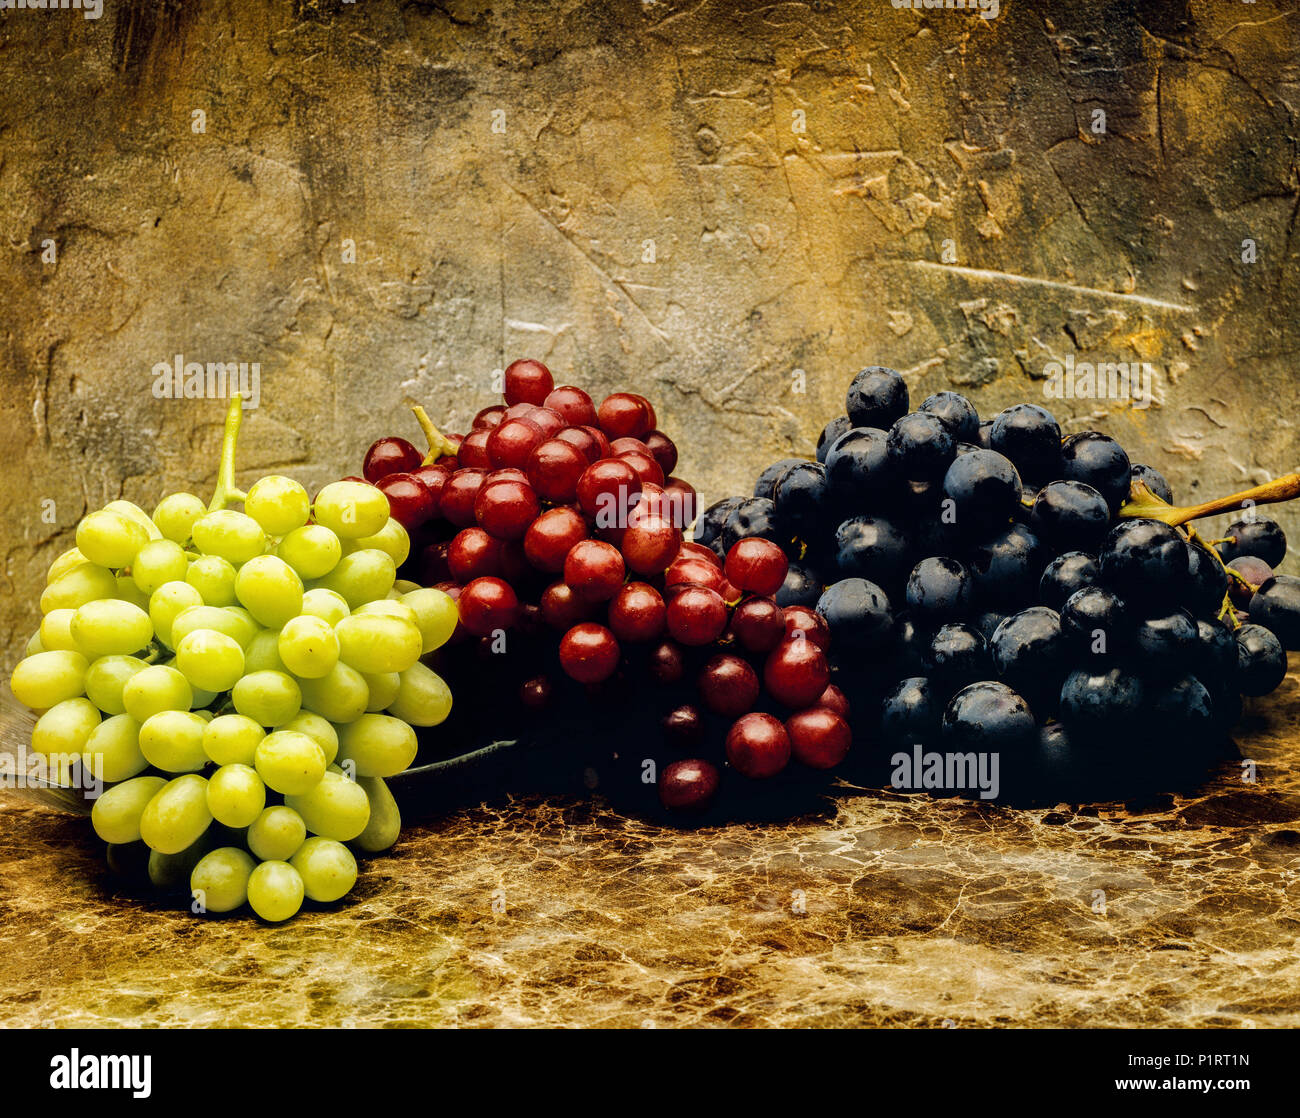 Agriculture - Green, red and black table grapes on marble, studio. #2. Stock Photo